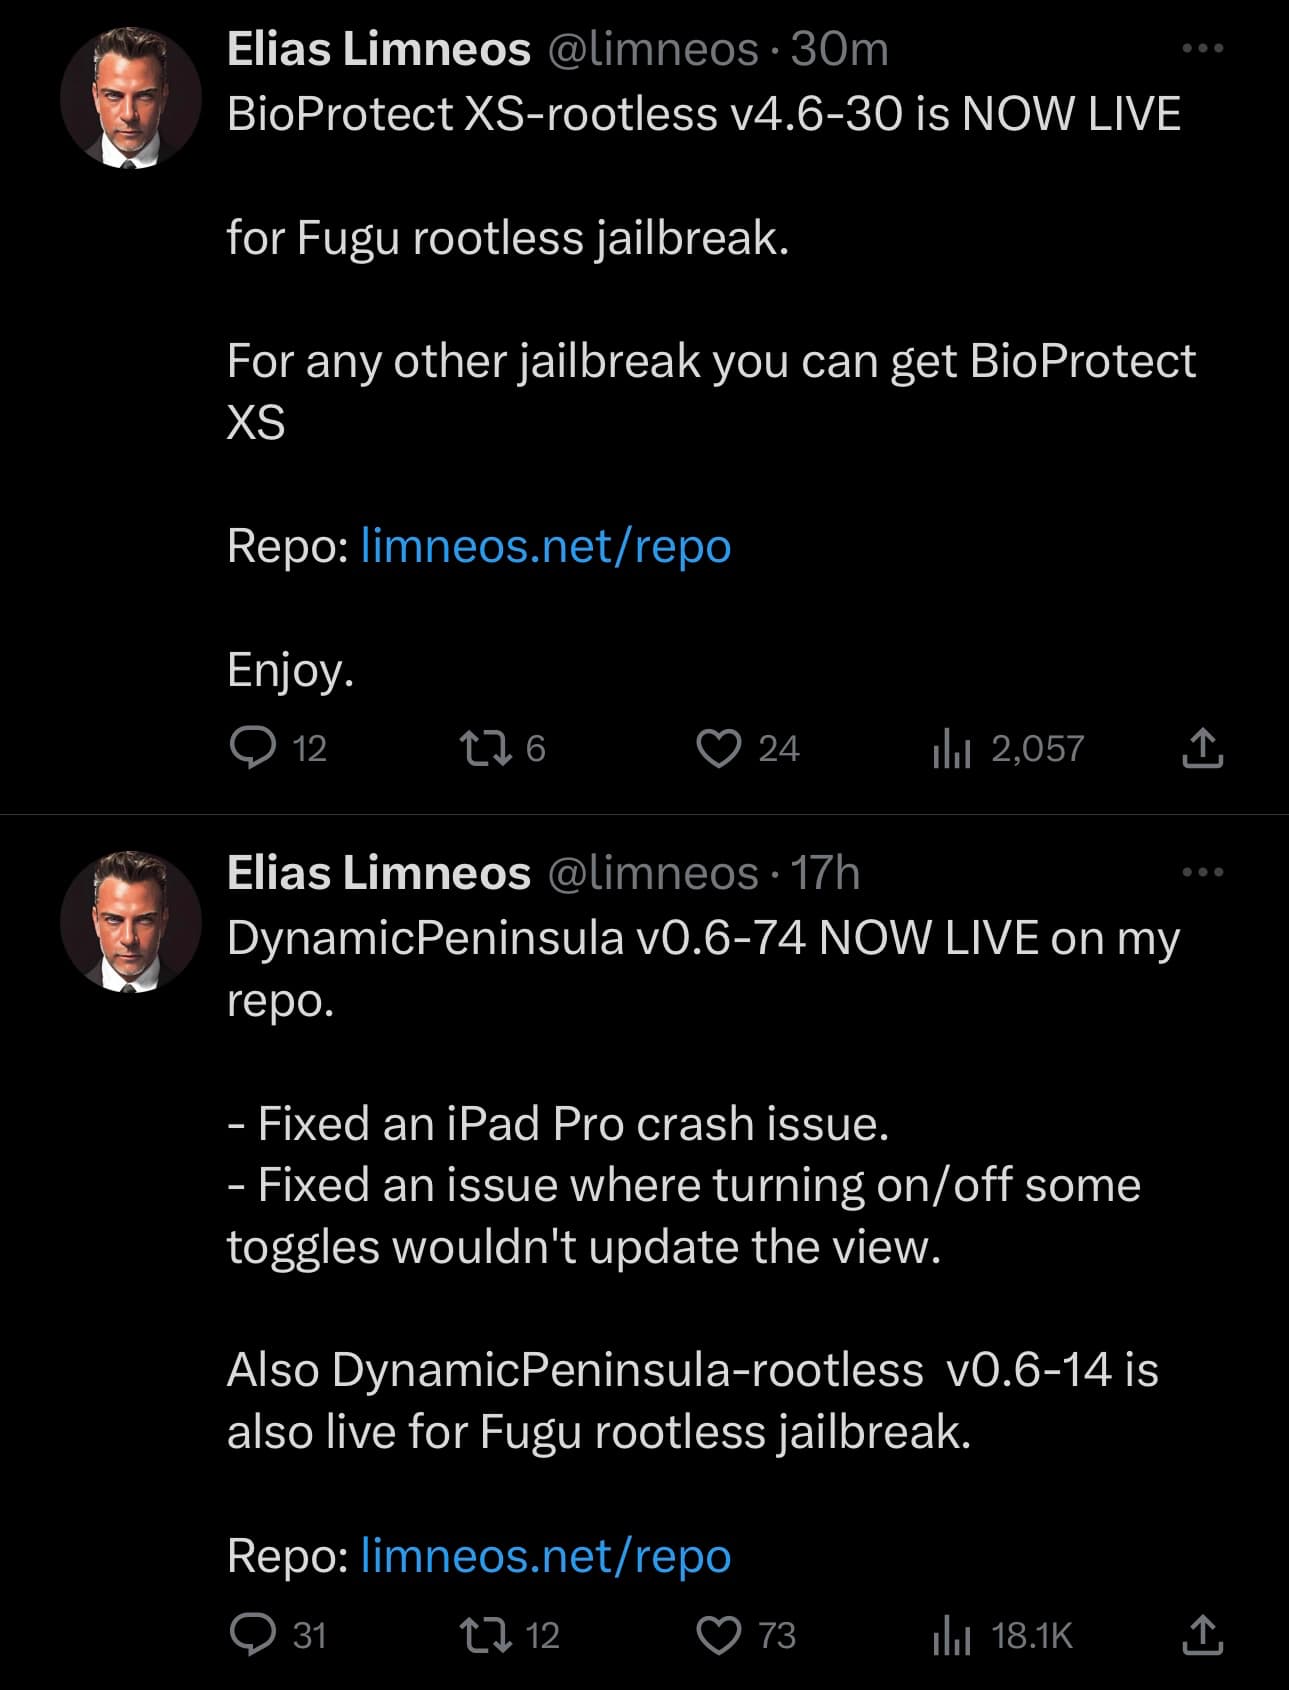 Limneos updates BioProtect XS and DynamicPeninsula for rootless.